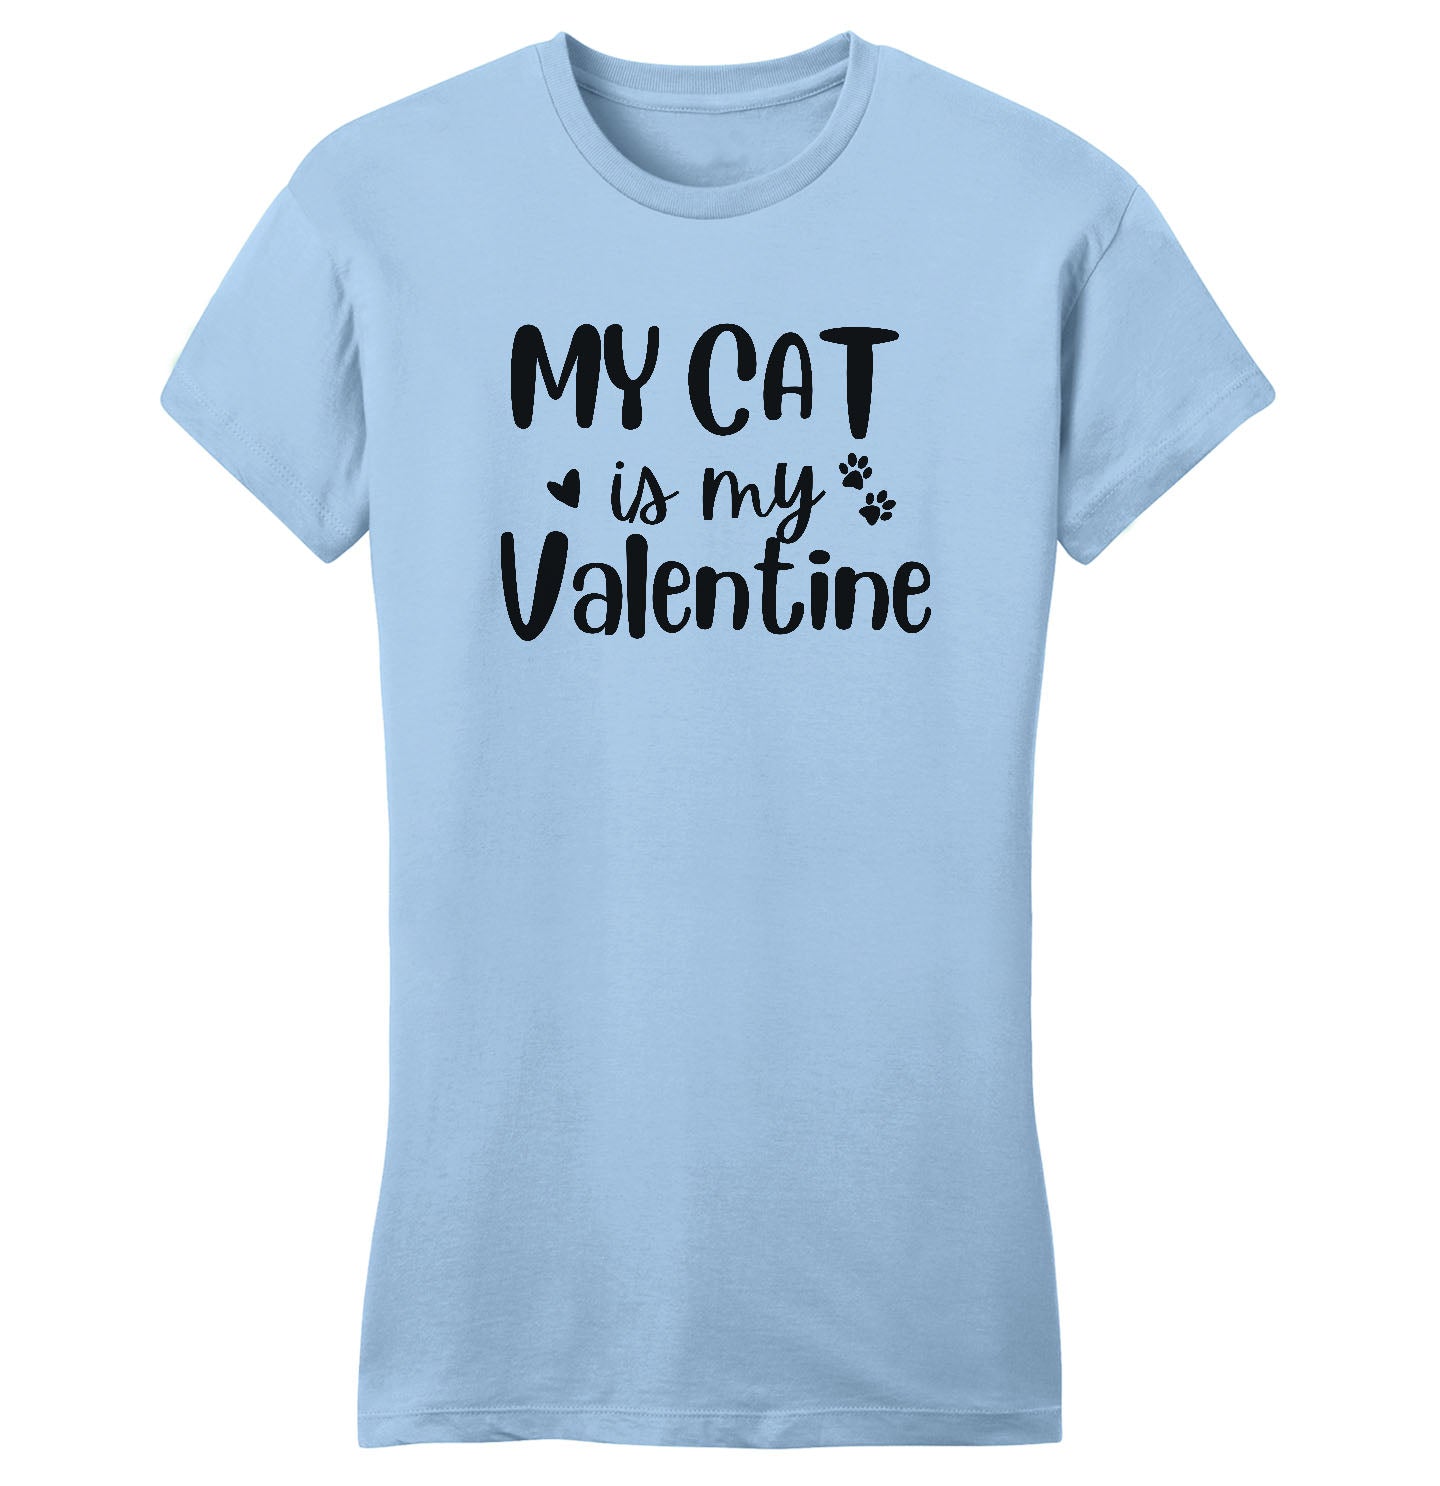 My Cat Valentine - Women's Fitted T-Shirt